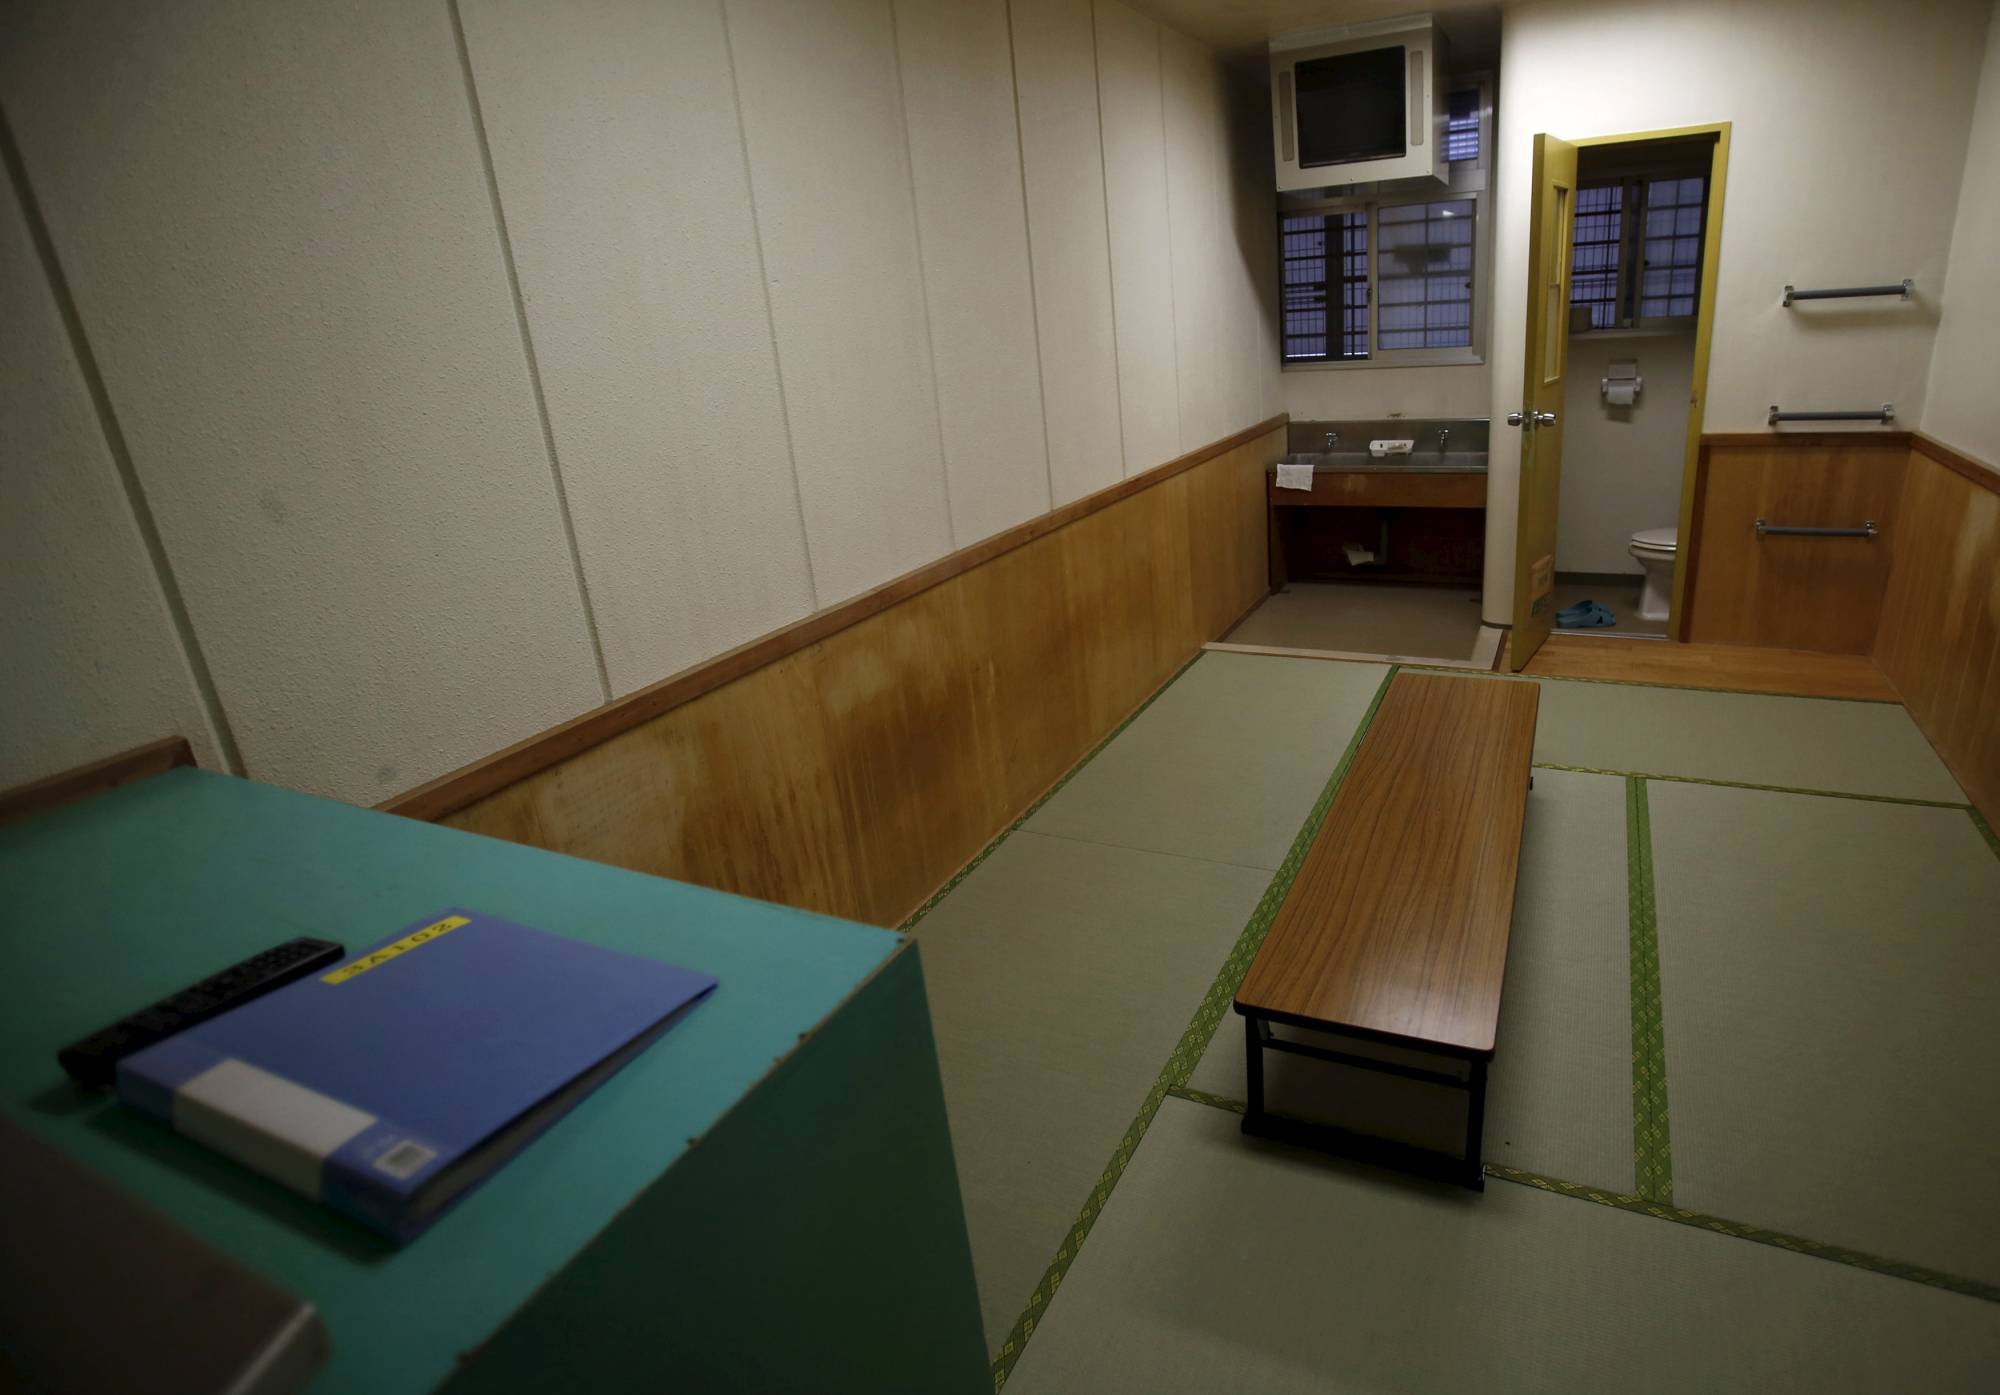 An inside view of a shared cell at the East Japan Immigration Center in Ushiku, Ibaraki Prefecture | REUTERS